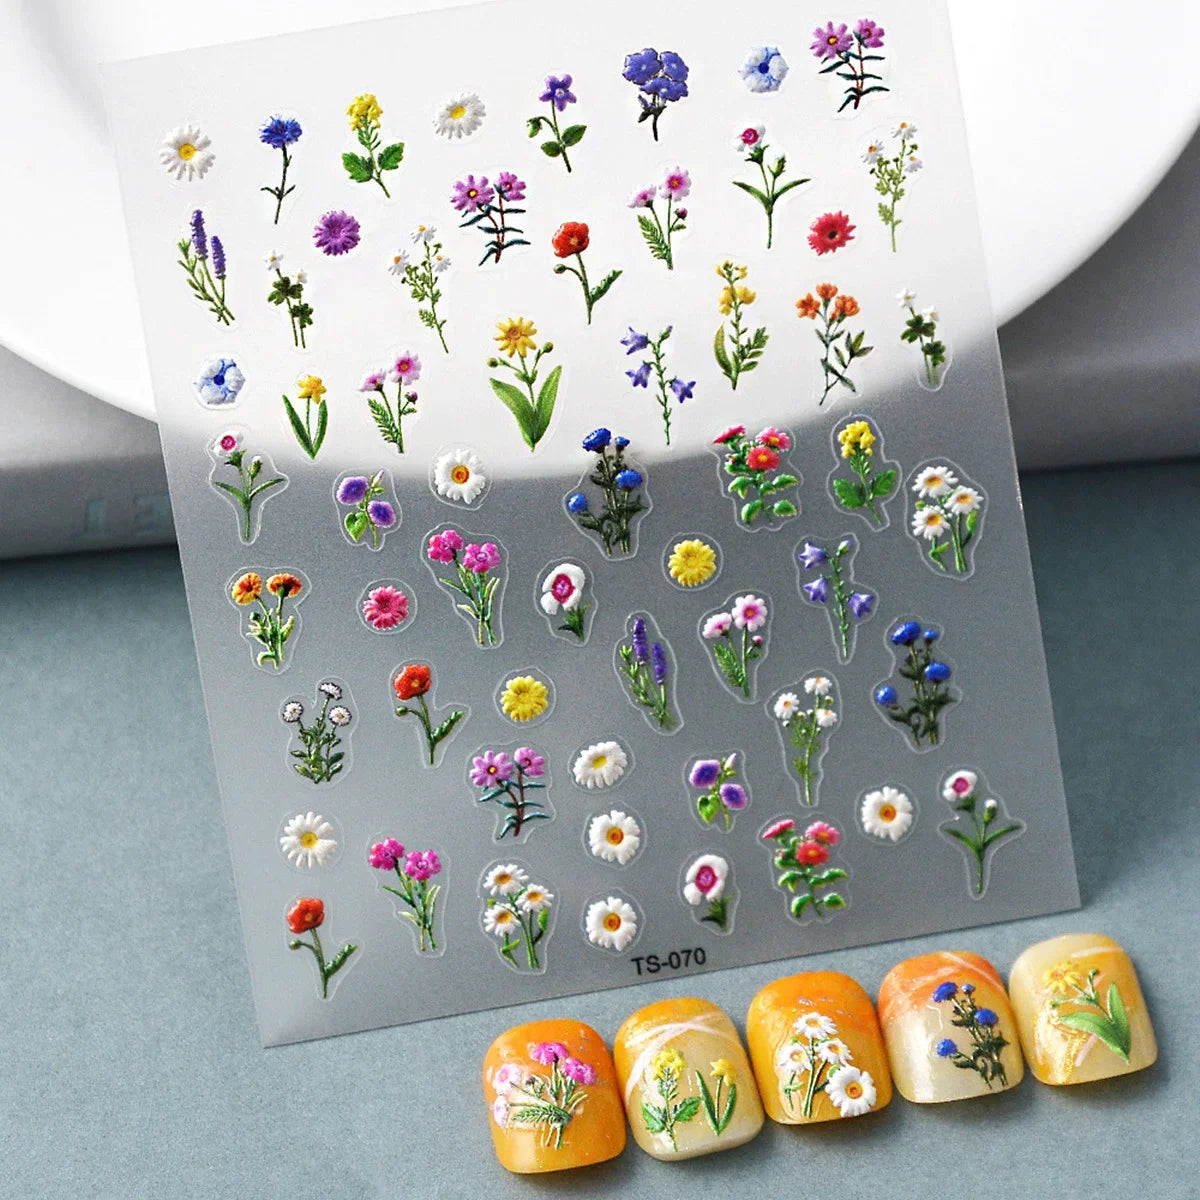 Flyshadow 1pcs 5D Embossed Colorful Daisy Nail Art Flower Stickers Mix Petal Leaf Self Adhesive Transfer Nail Decoration Slider Decals DIY